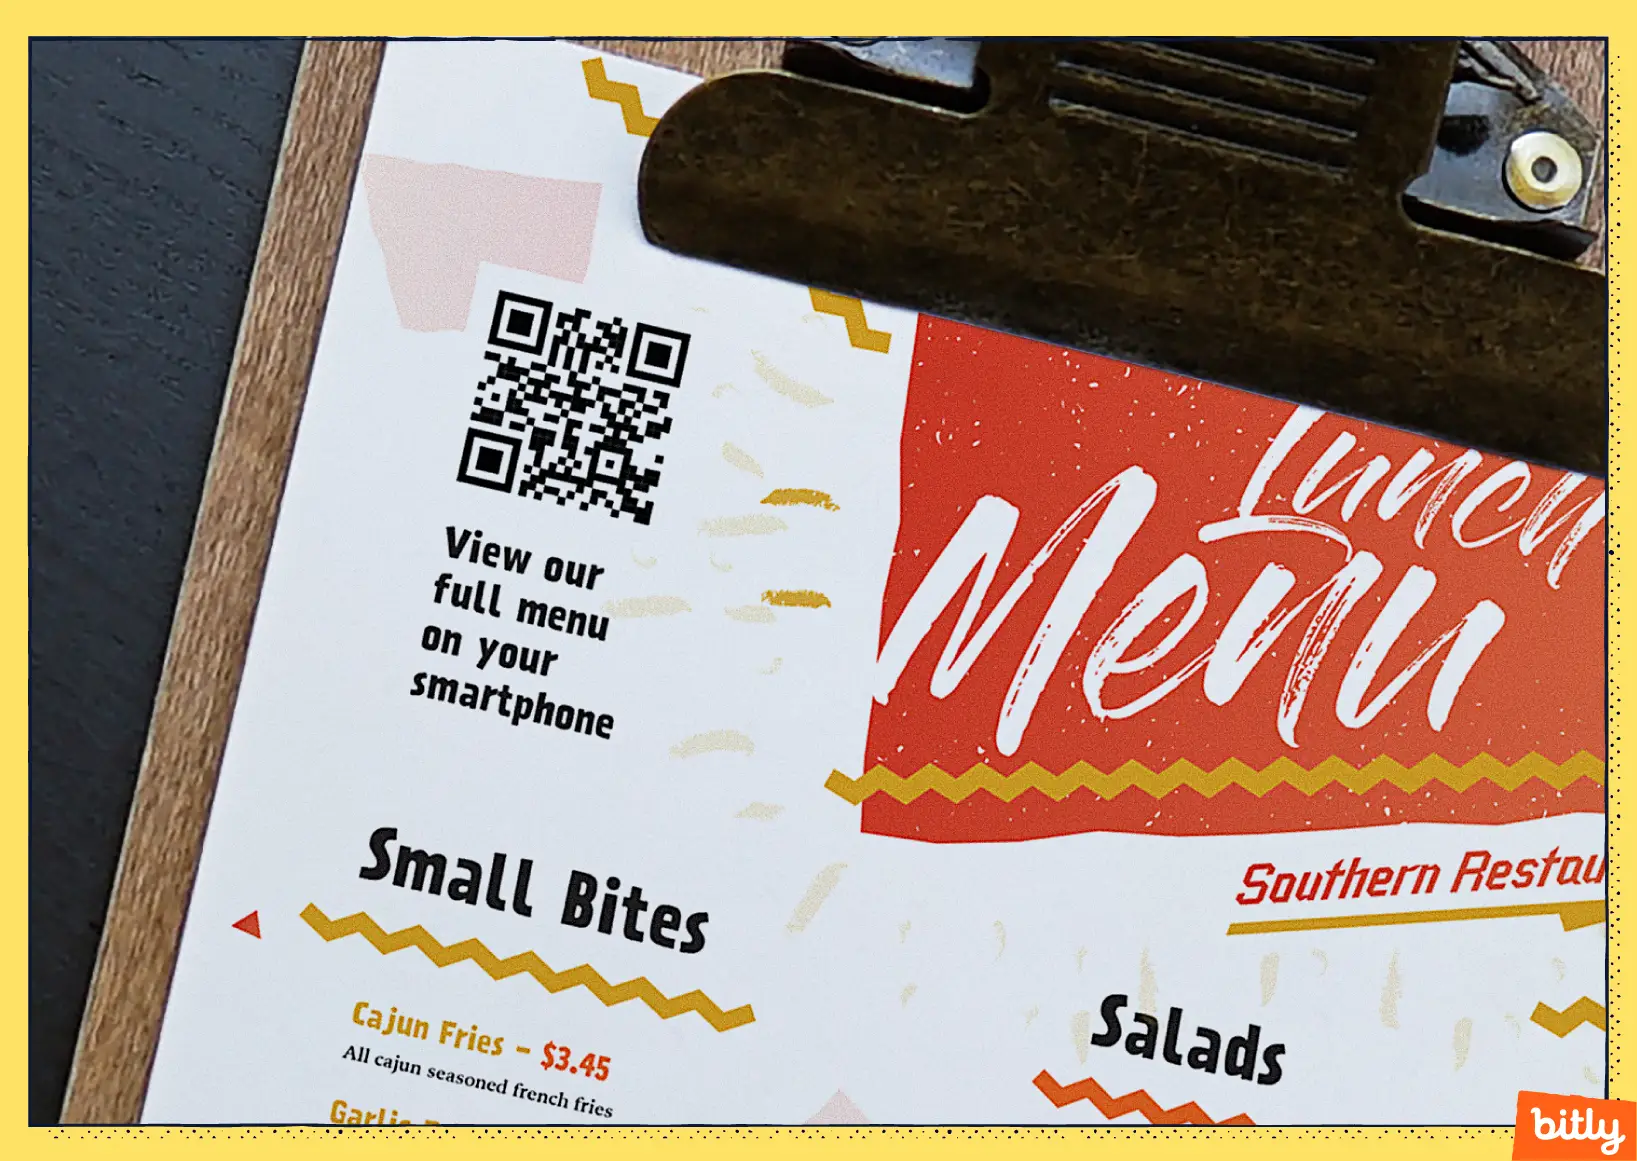 A close up shot of a menu for a southern restaurant with a QR Code on the top left corner and descriptive text below to scan for the menu.